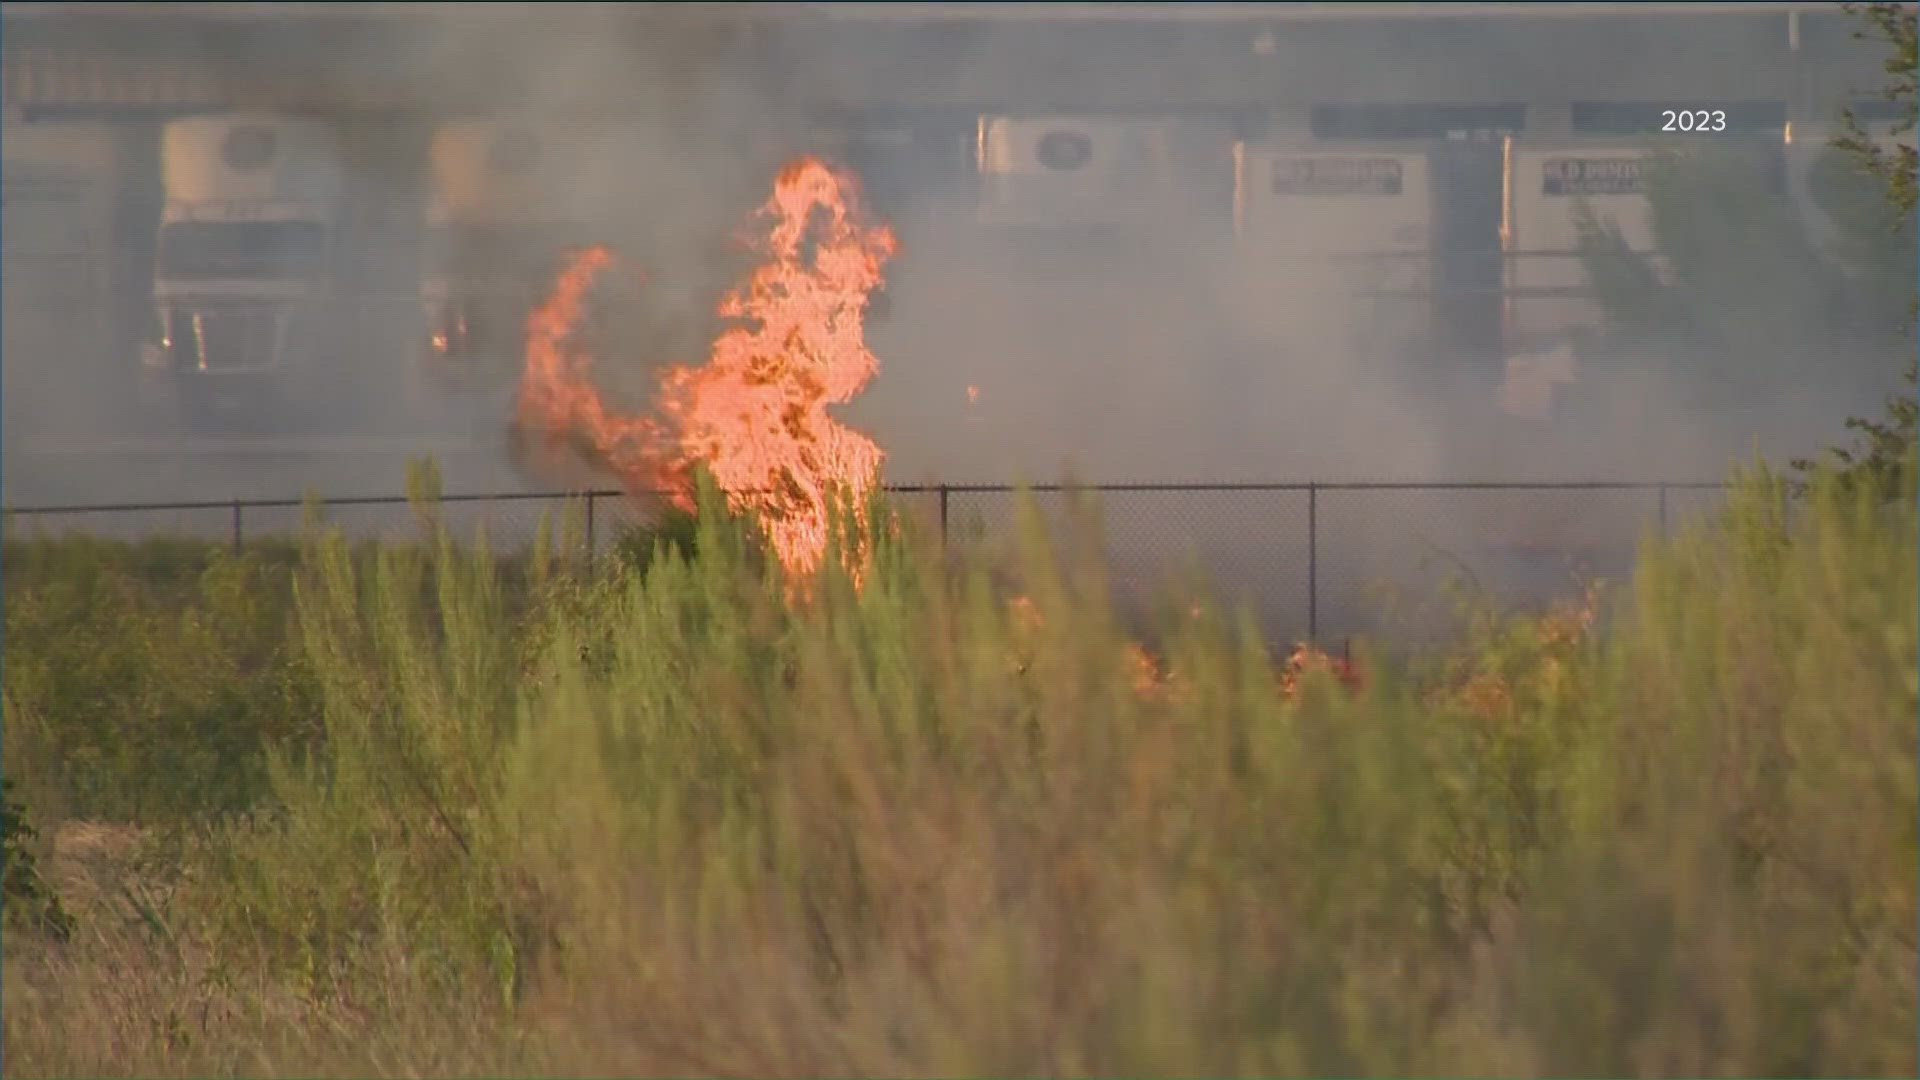 The Austin area is no stranger to wildfires and local fire officials say the time to prepare for fire season is now.